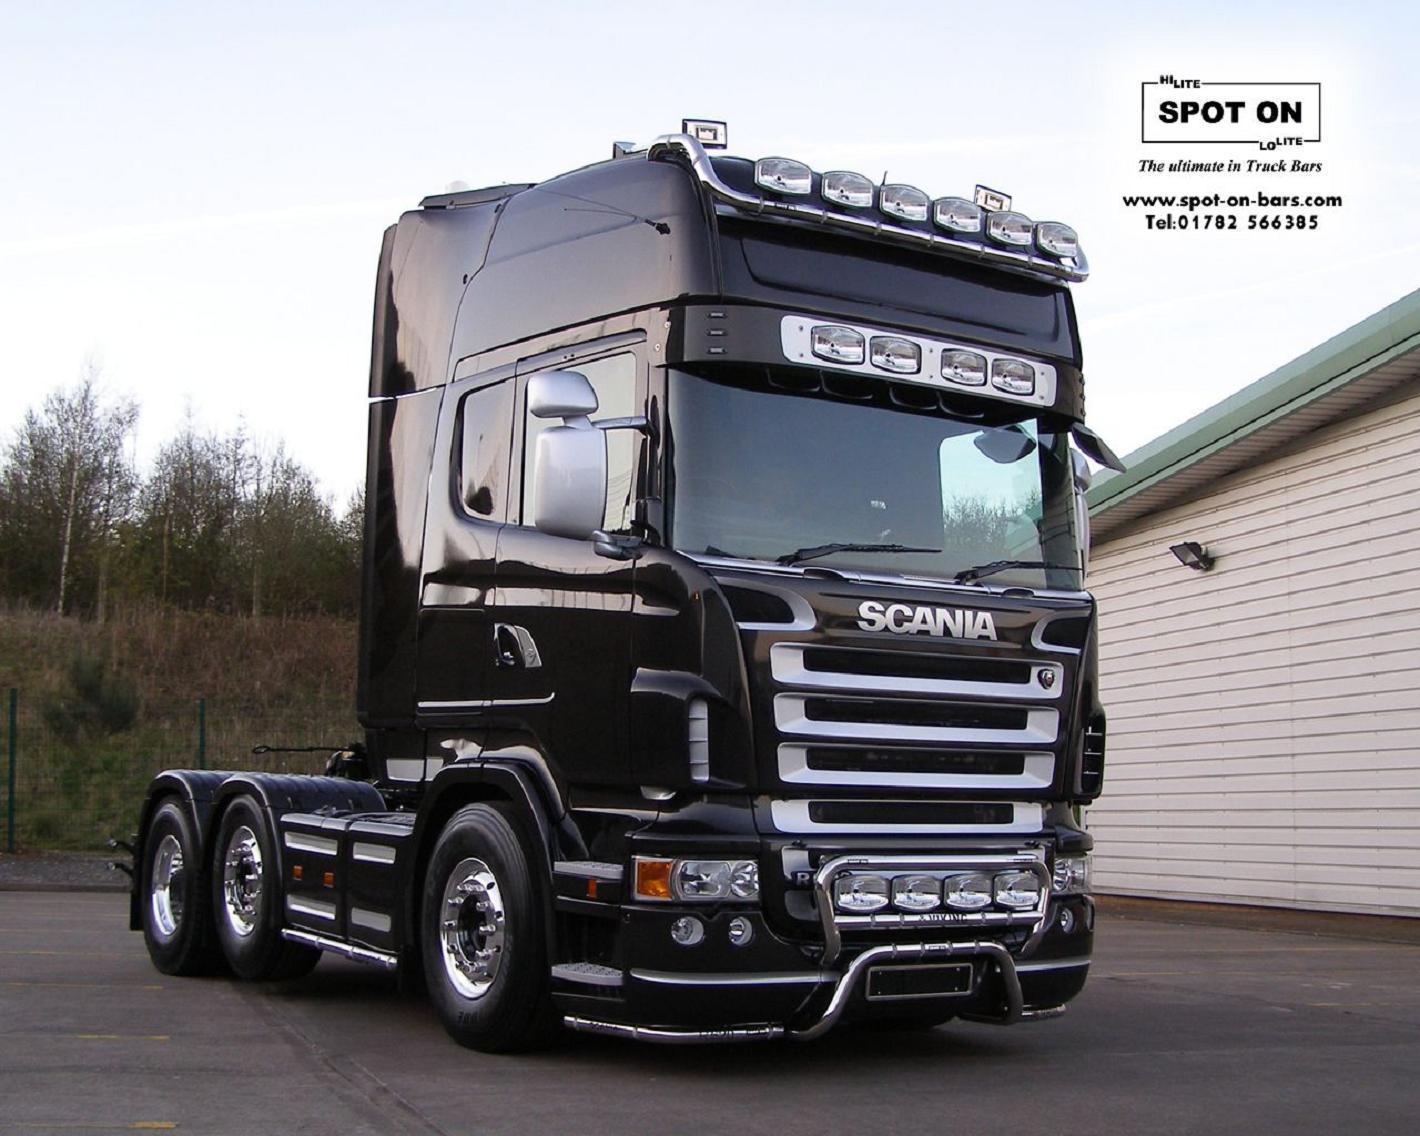 Scania Truck Wallpapers Image HD Wallpapers Pictures